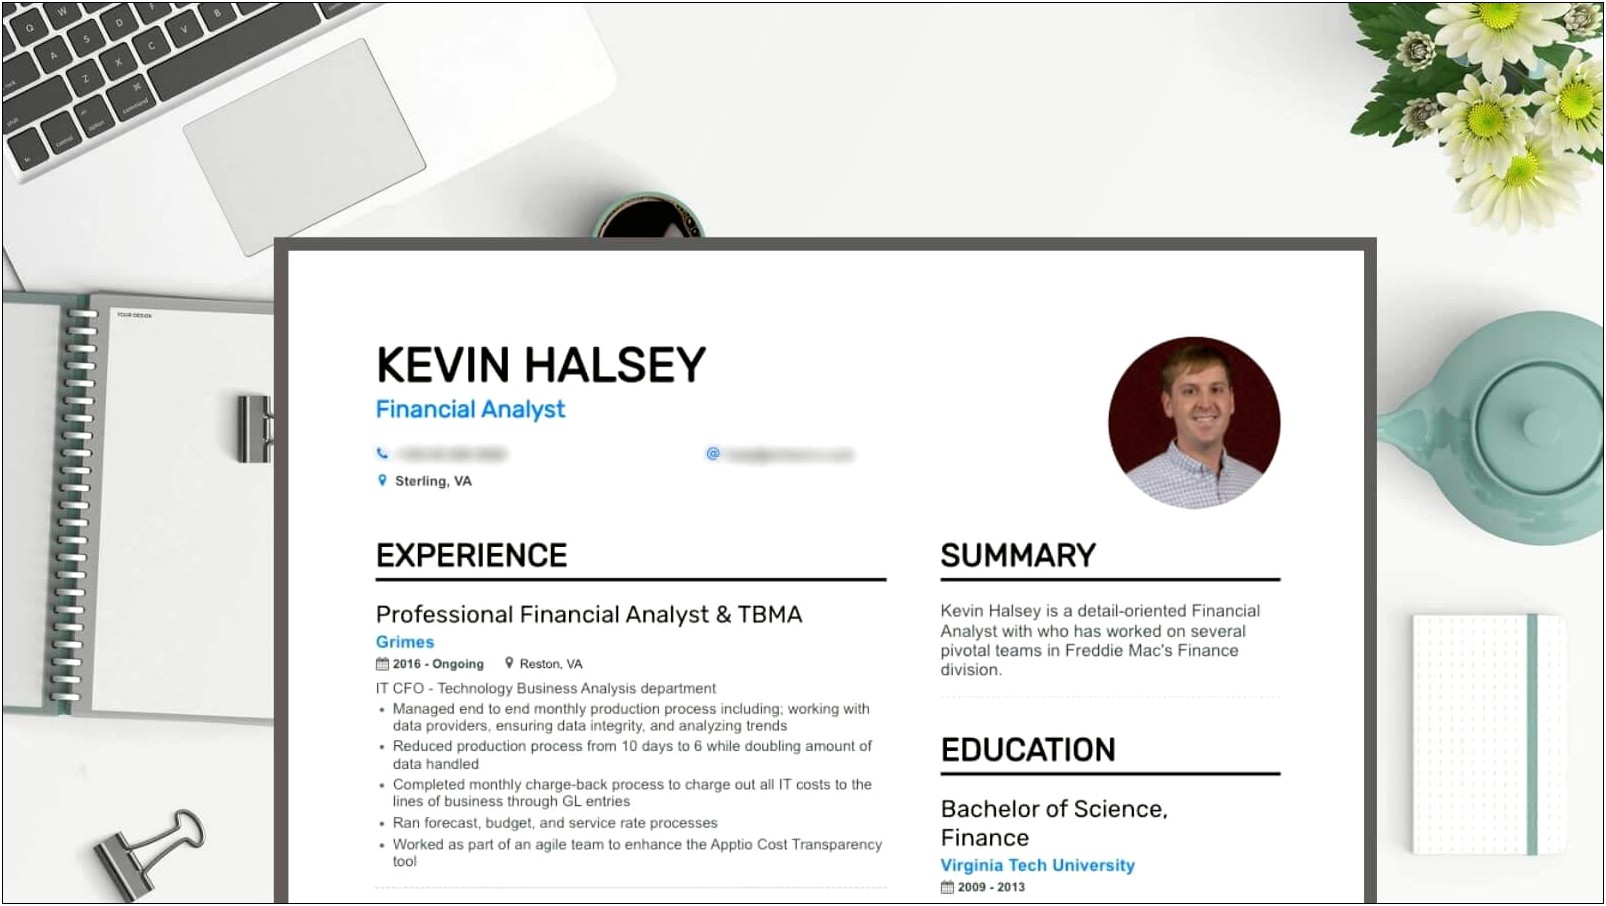 Resume Profile Summary Examples For Students